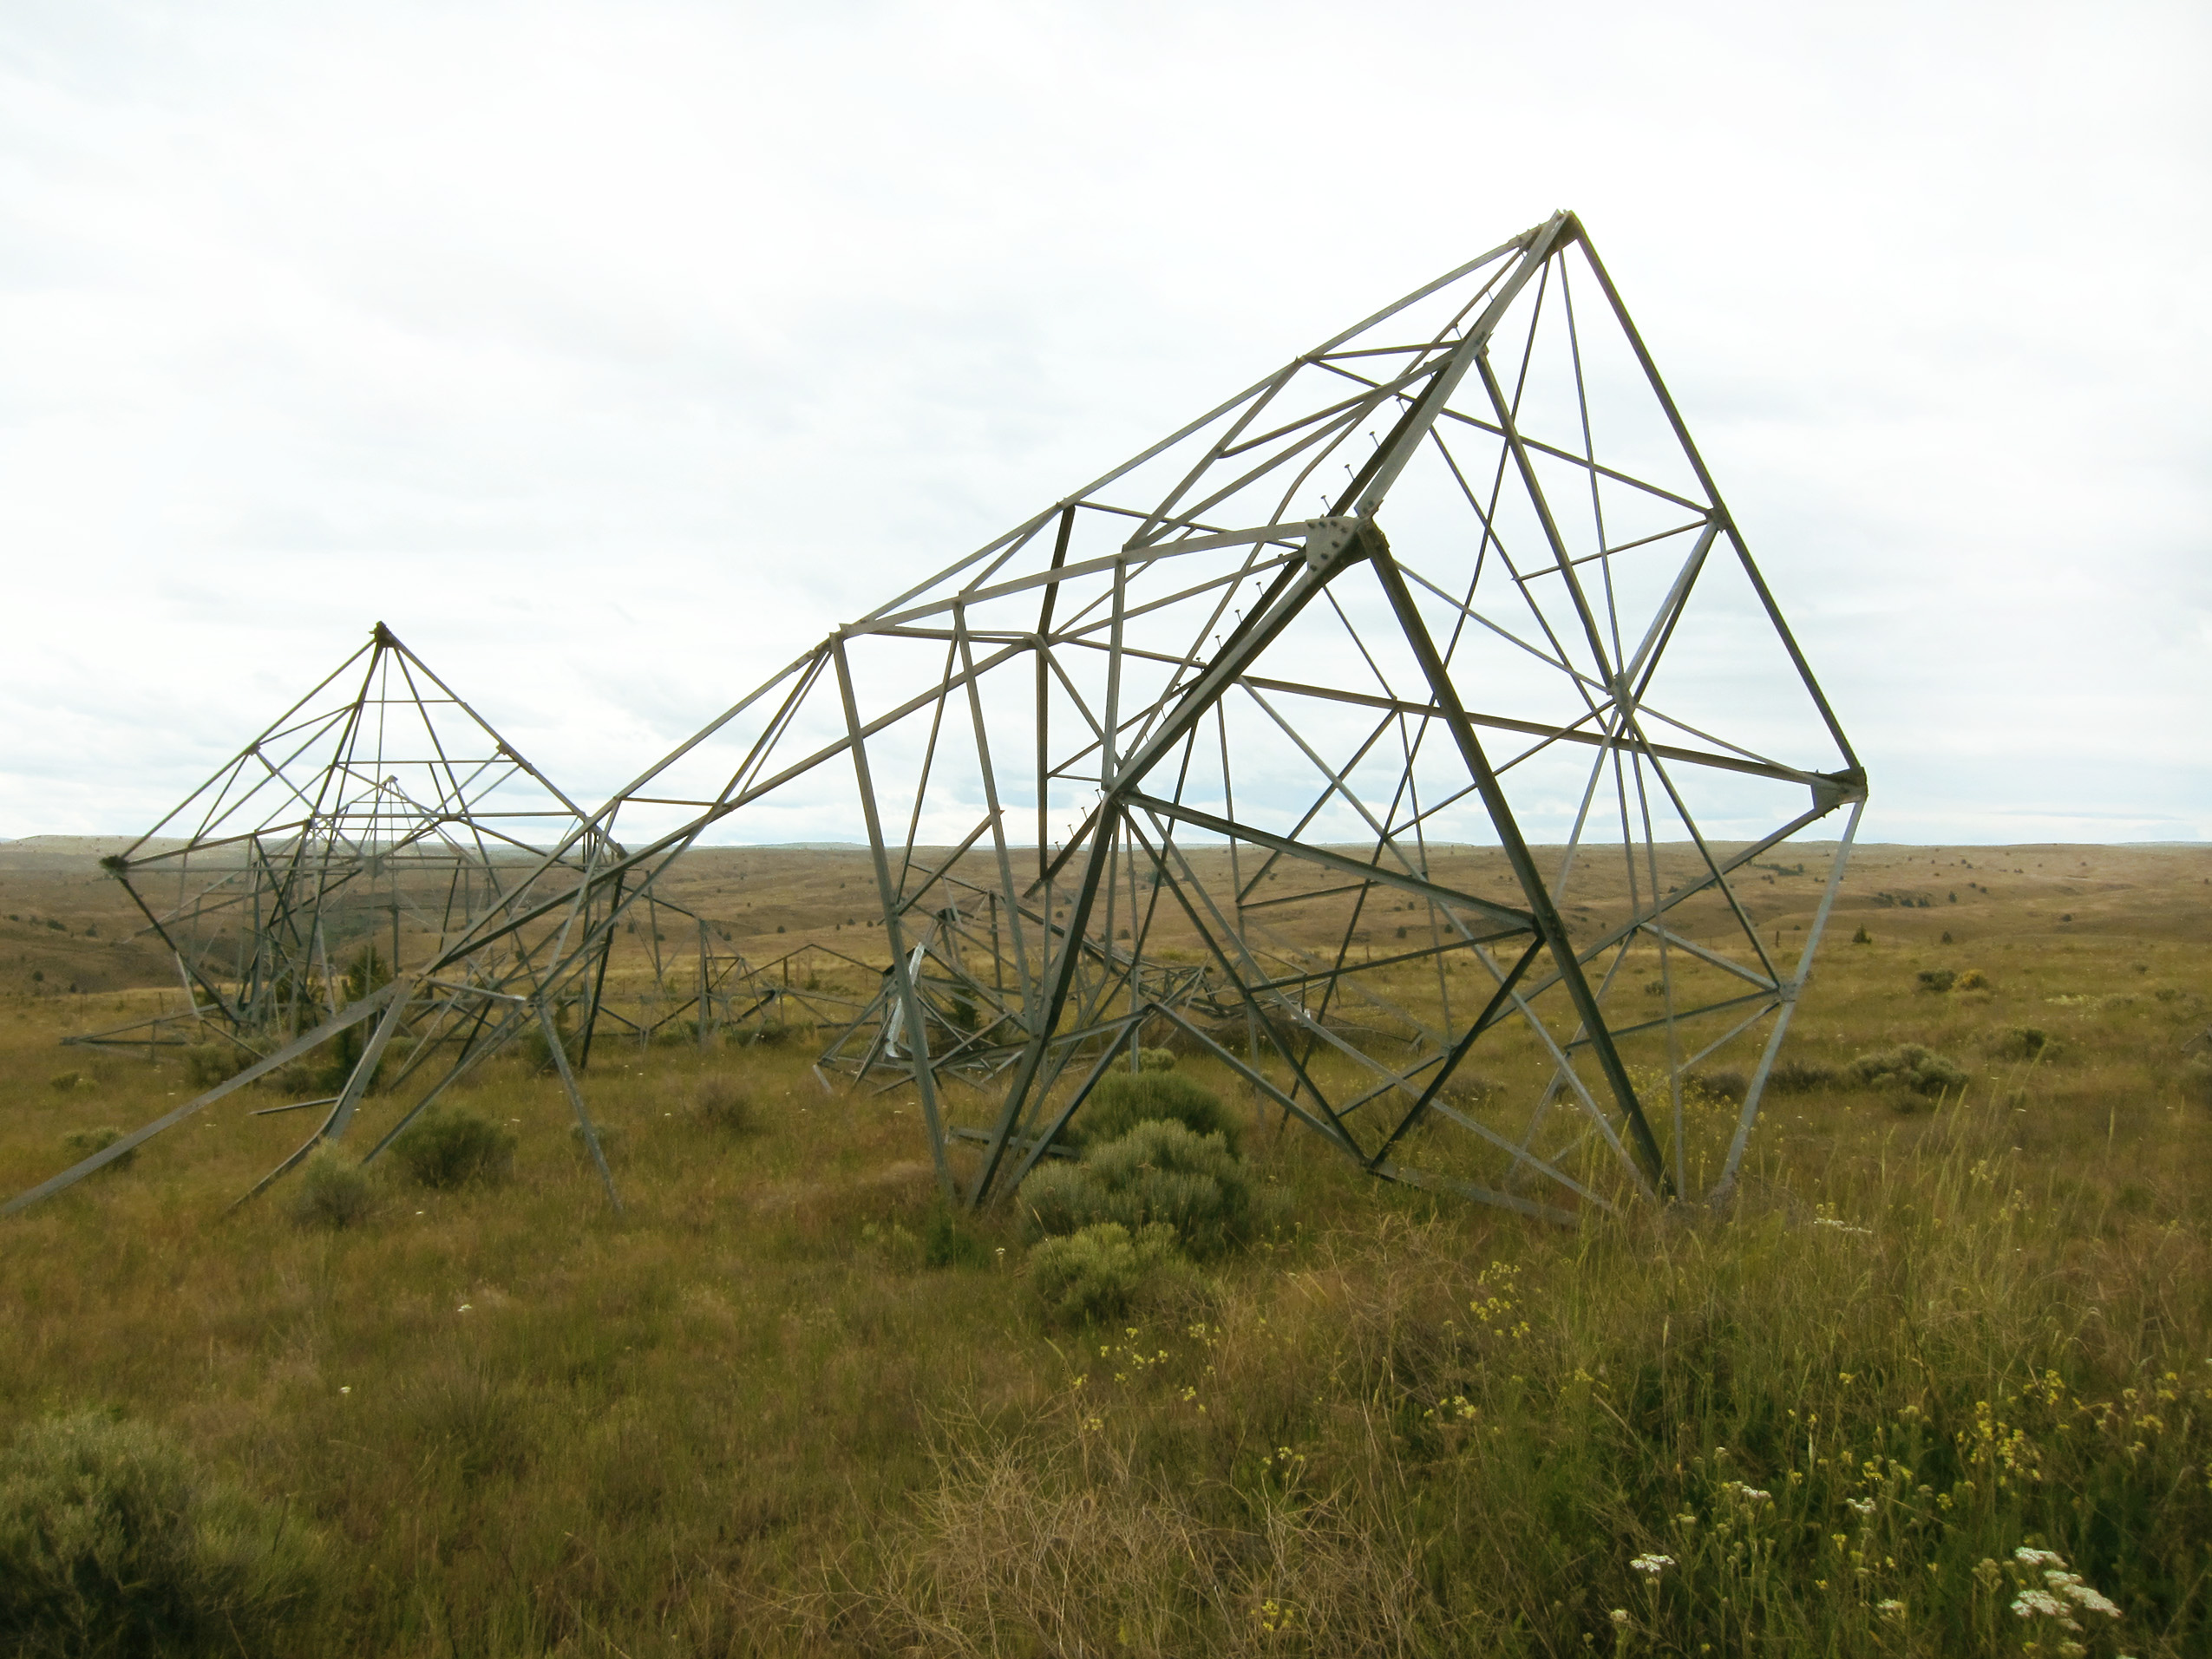 Collapsed metal structure in field.